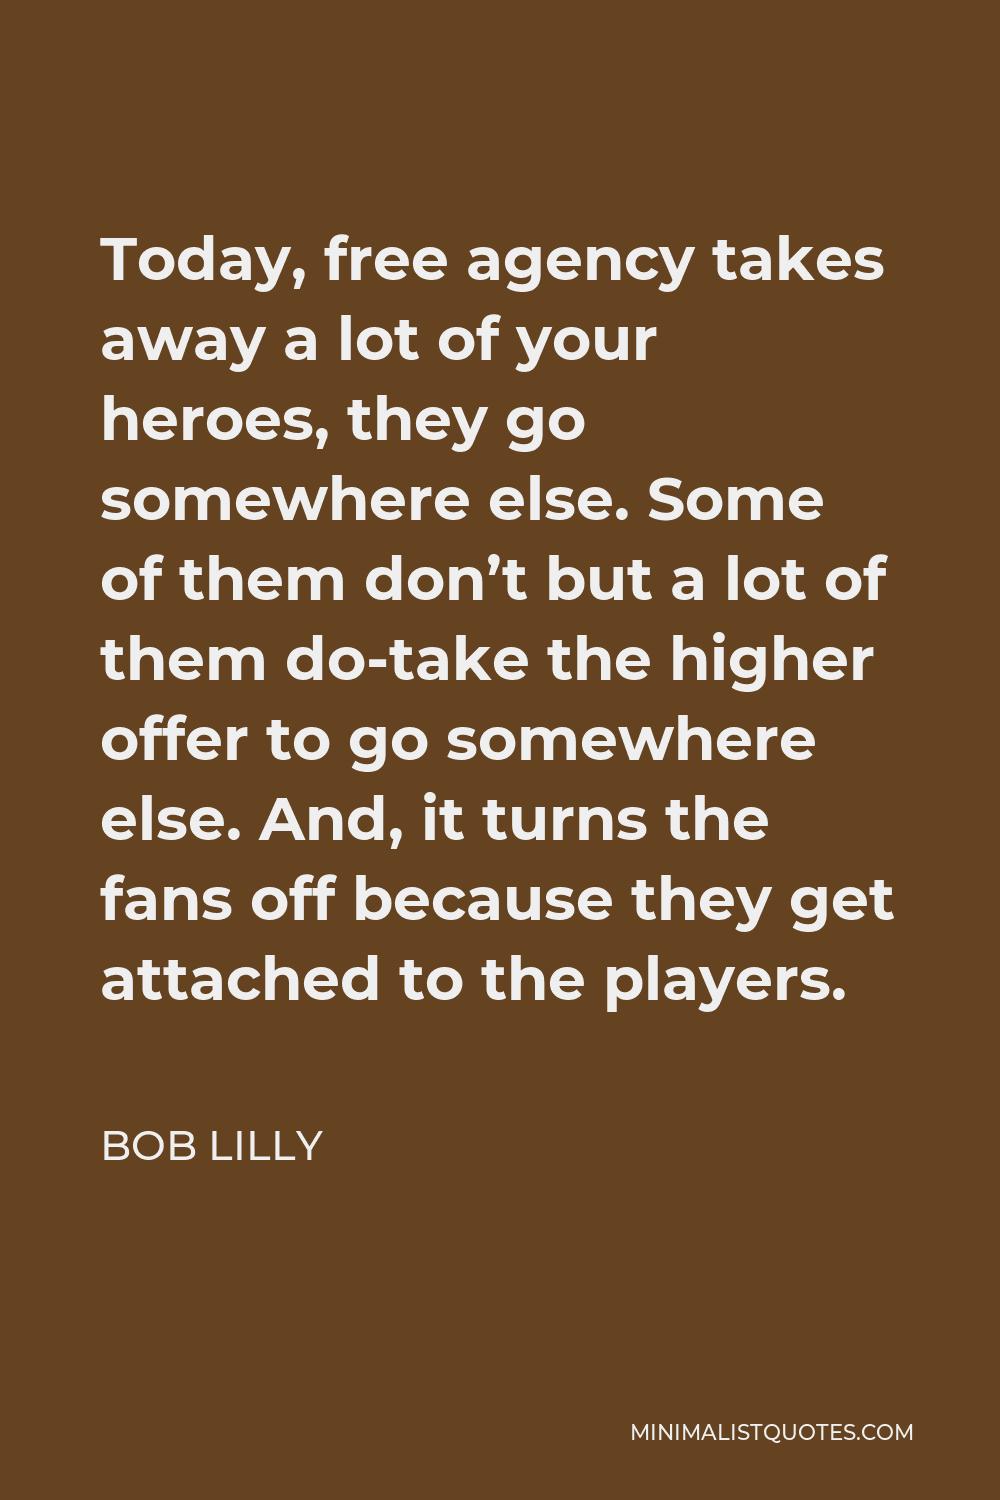 Bob Lilly Quote - Today, free agency takes away a lot of your heroes, they go somewhere else. Some of them don’t but a lot of them do-take the higher offer to go somewhere else. And, it turns the fans off because they get attached to the players.